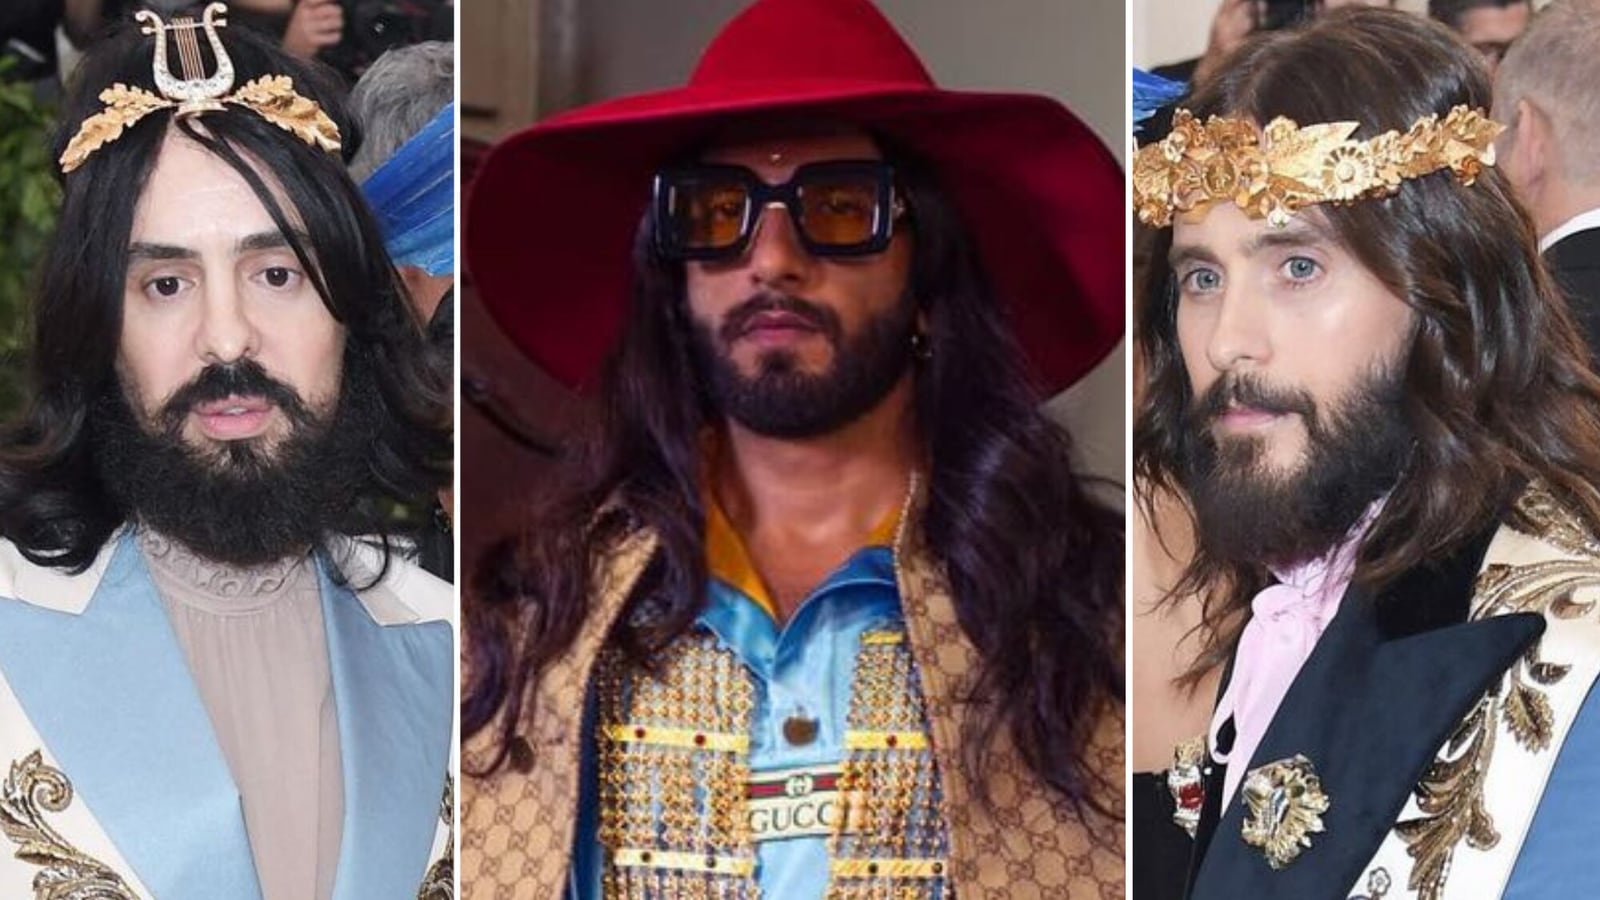 Ranveer Singh Channels Jared Leto Alessandro Michele In Uber Pricey Gucci Look Fashion Trends Global Circulate